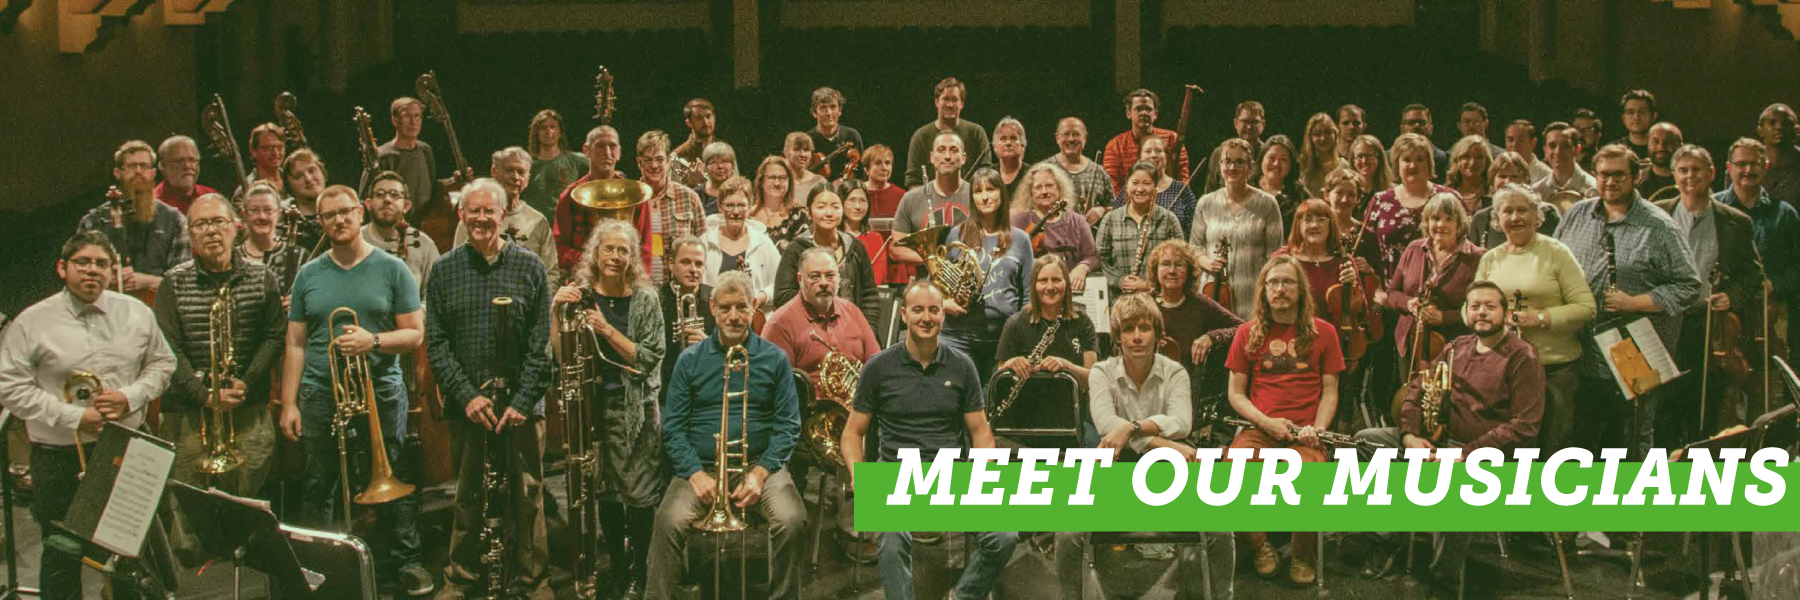 page header image of North State Symphony musicians